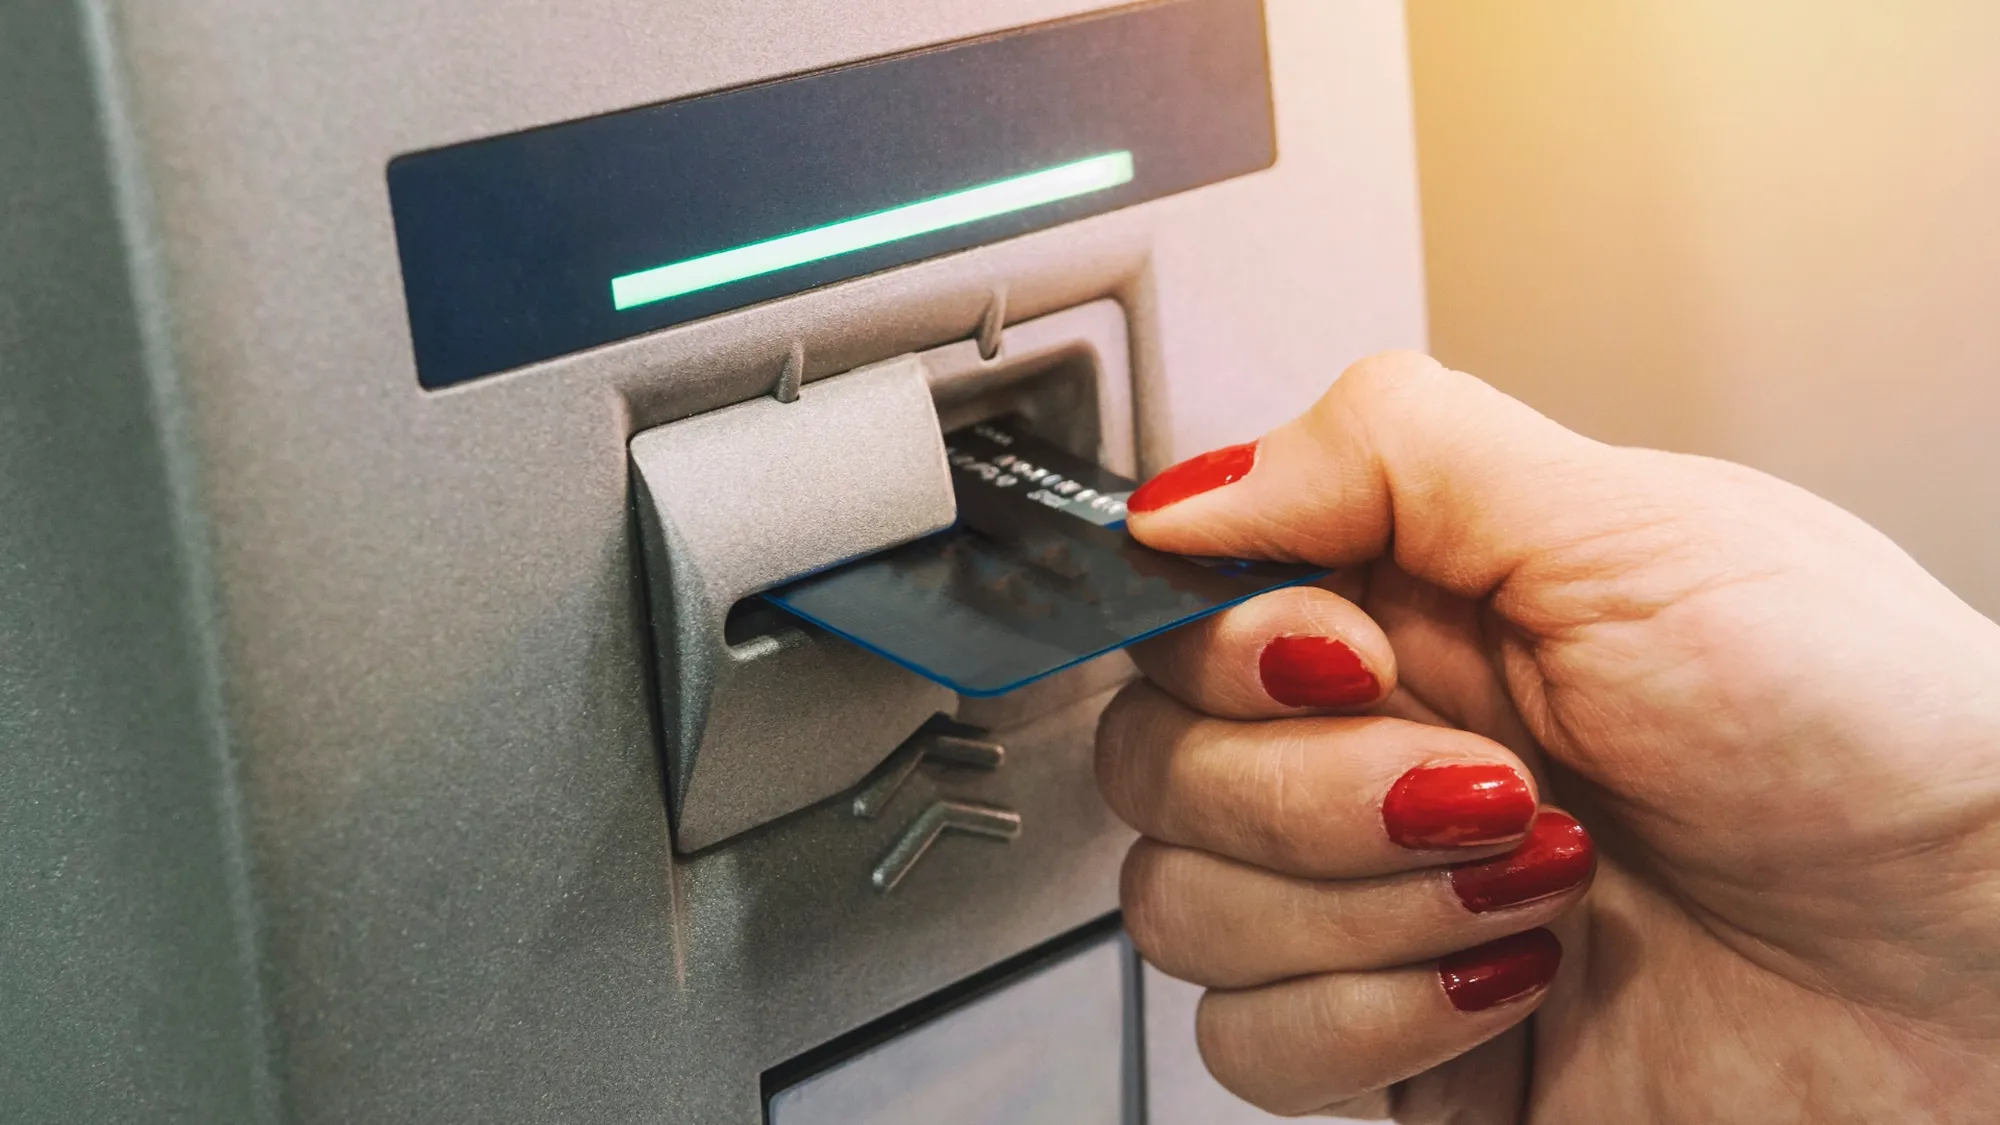 how to bank deposit money into a bank account without an atm card